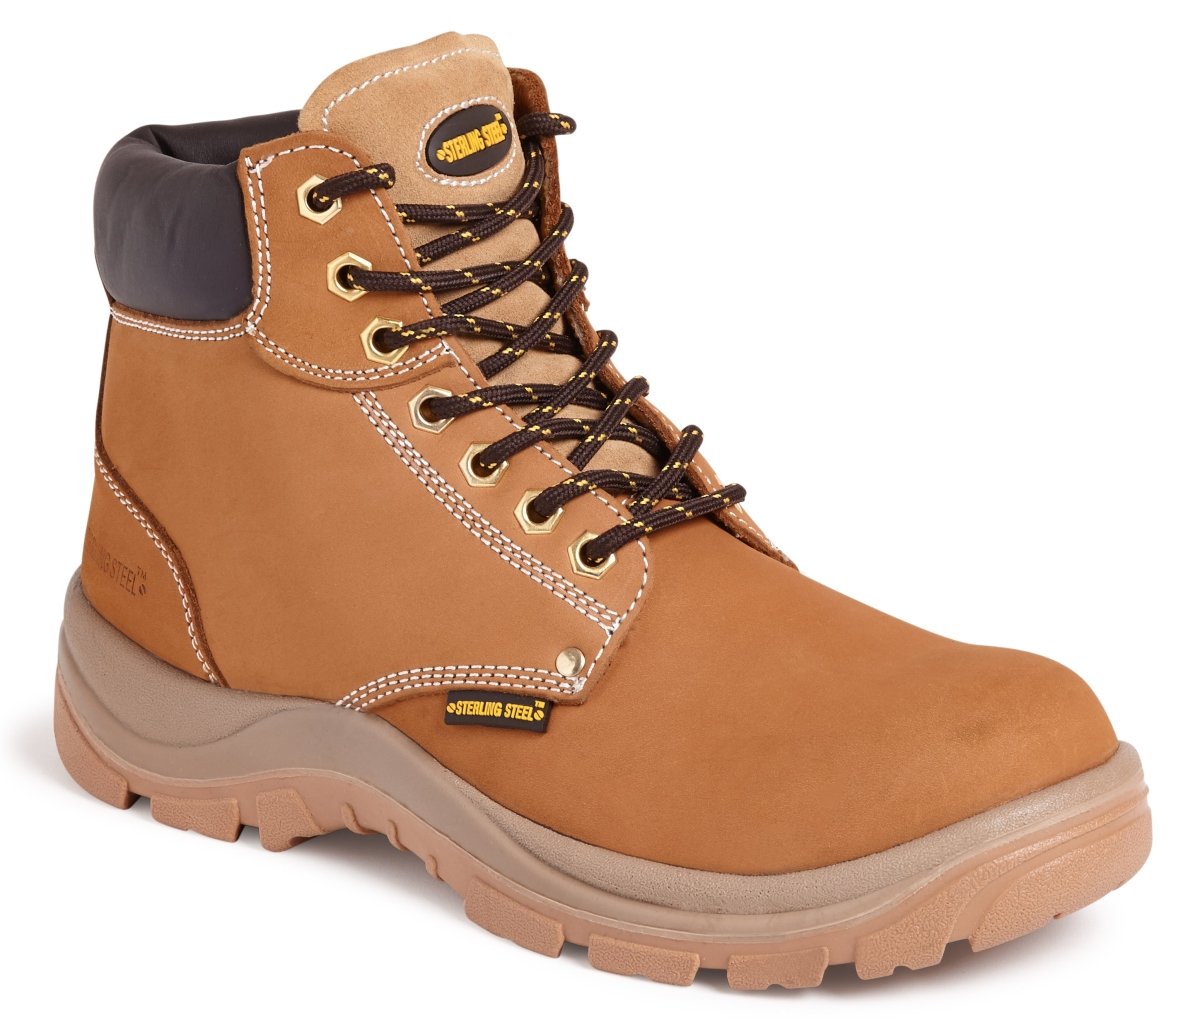 Sterling Steel SS819CM Steel Toe Cap Safety Hiker Boots - Shoe Store Direct